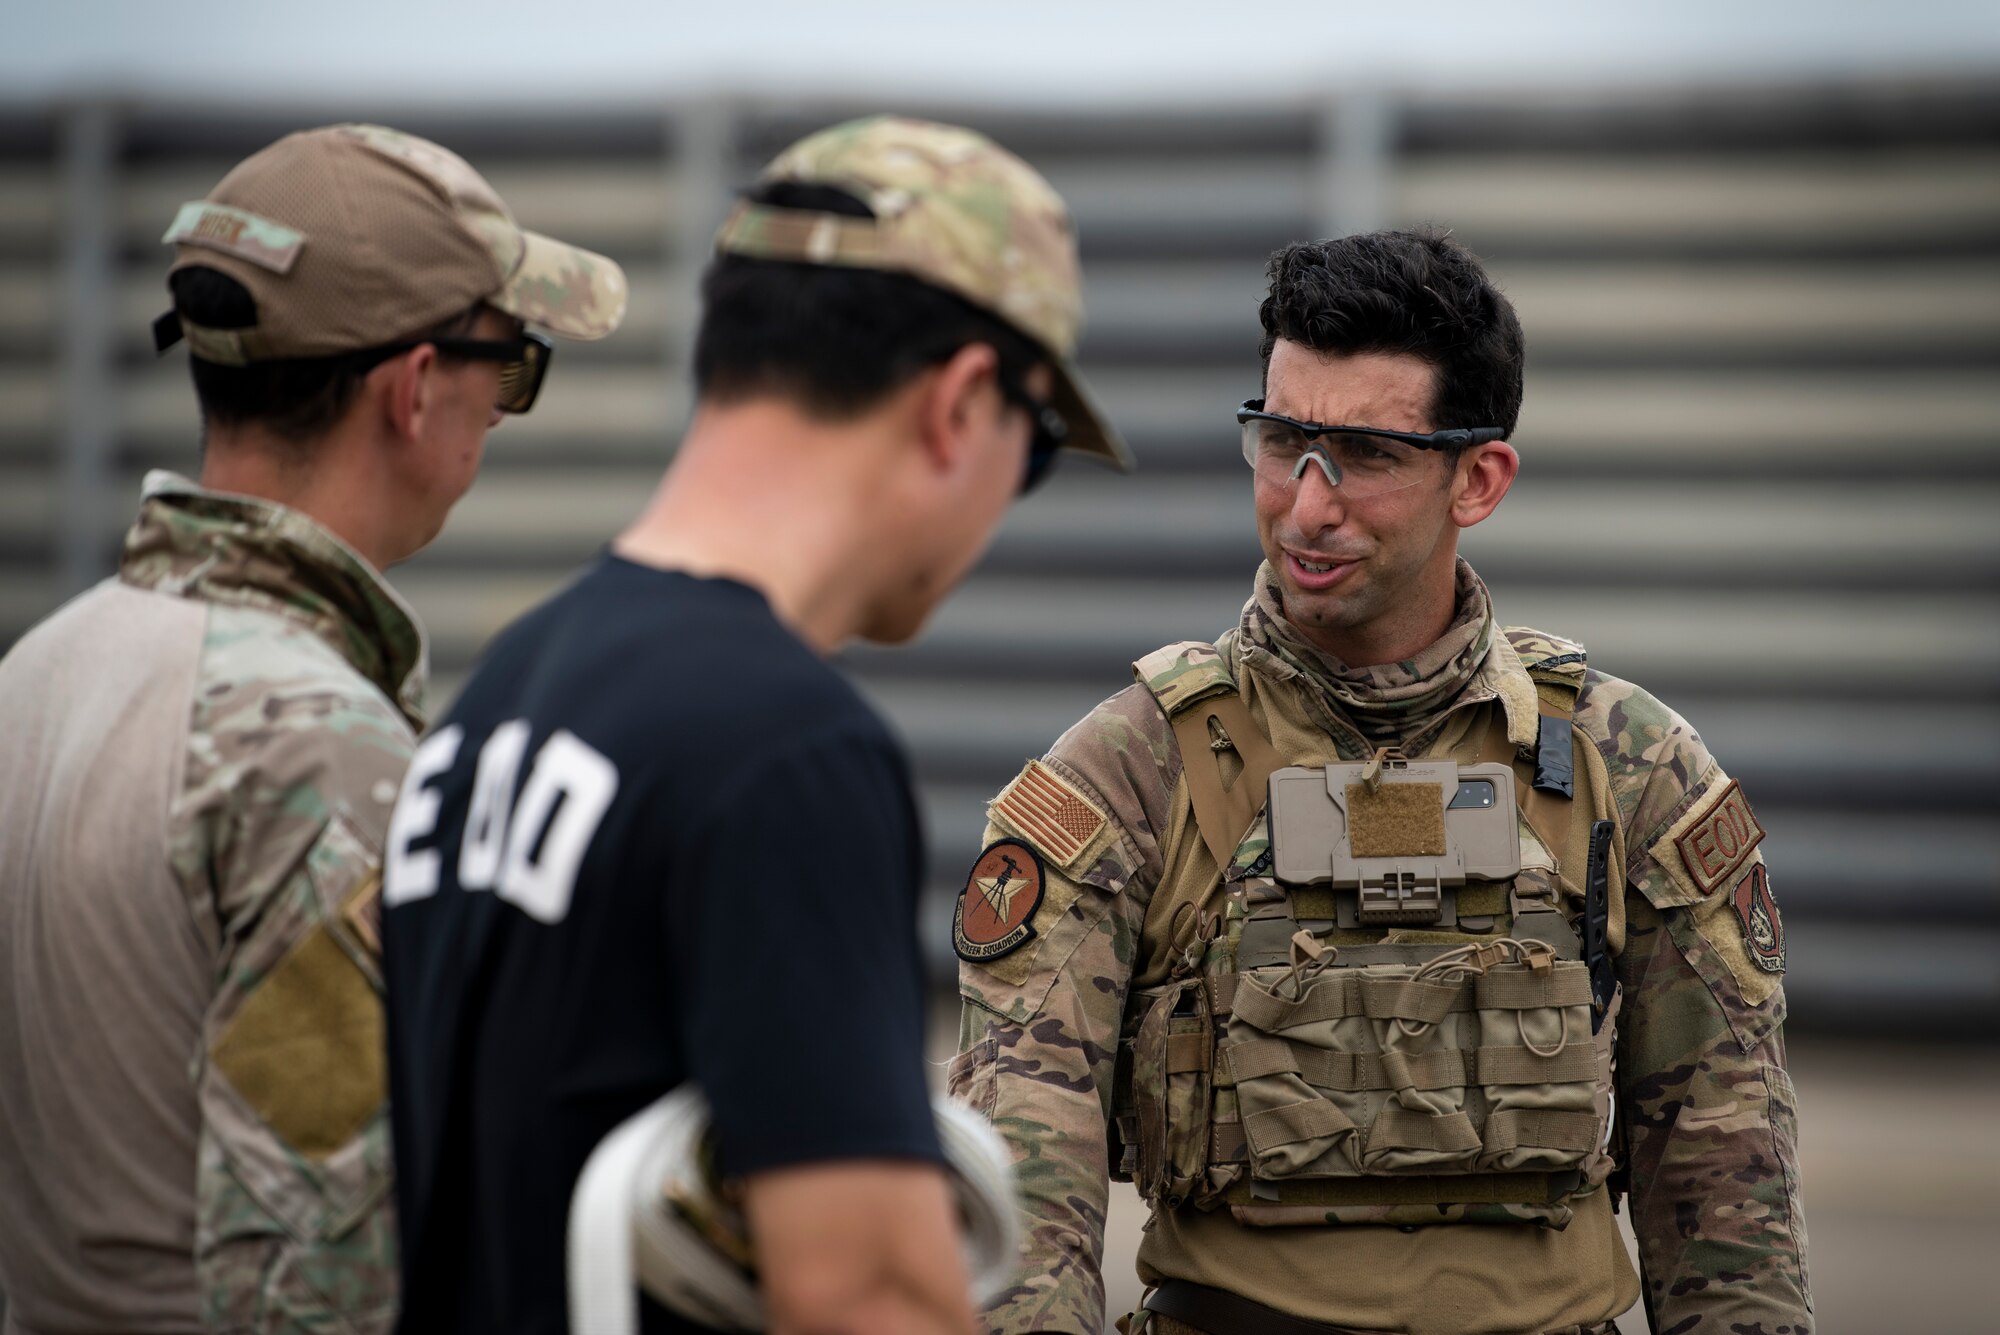 U.S. Air Force Staff Sgt. Michael Augustus, and Tech. Sgt. Derek Horn, 35th Civil Engineer Squadron, Explosive Ordnance Disposal technicians from Misawa Air Base, Japan, discuss procedures after responding to a mock chemical weapon disposal scenario at Suwon Air Base, Republic of Korea, July 6, 2022.